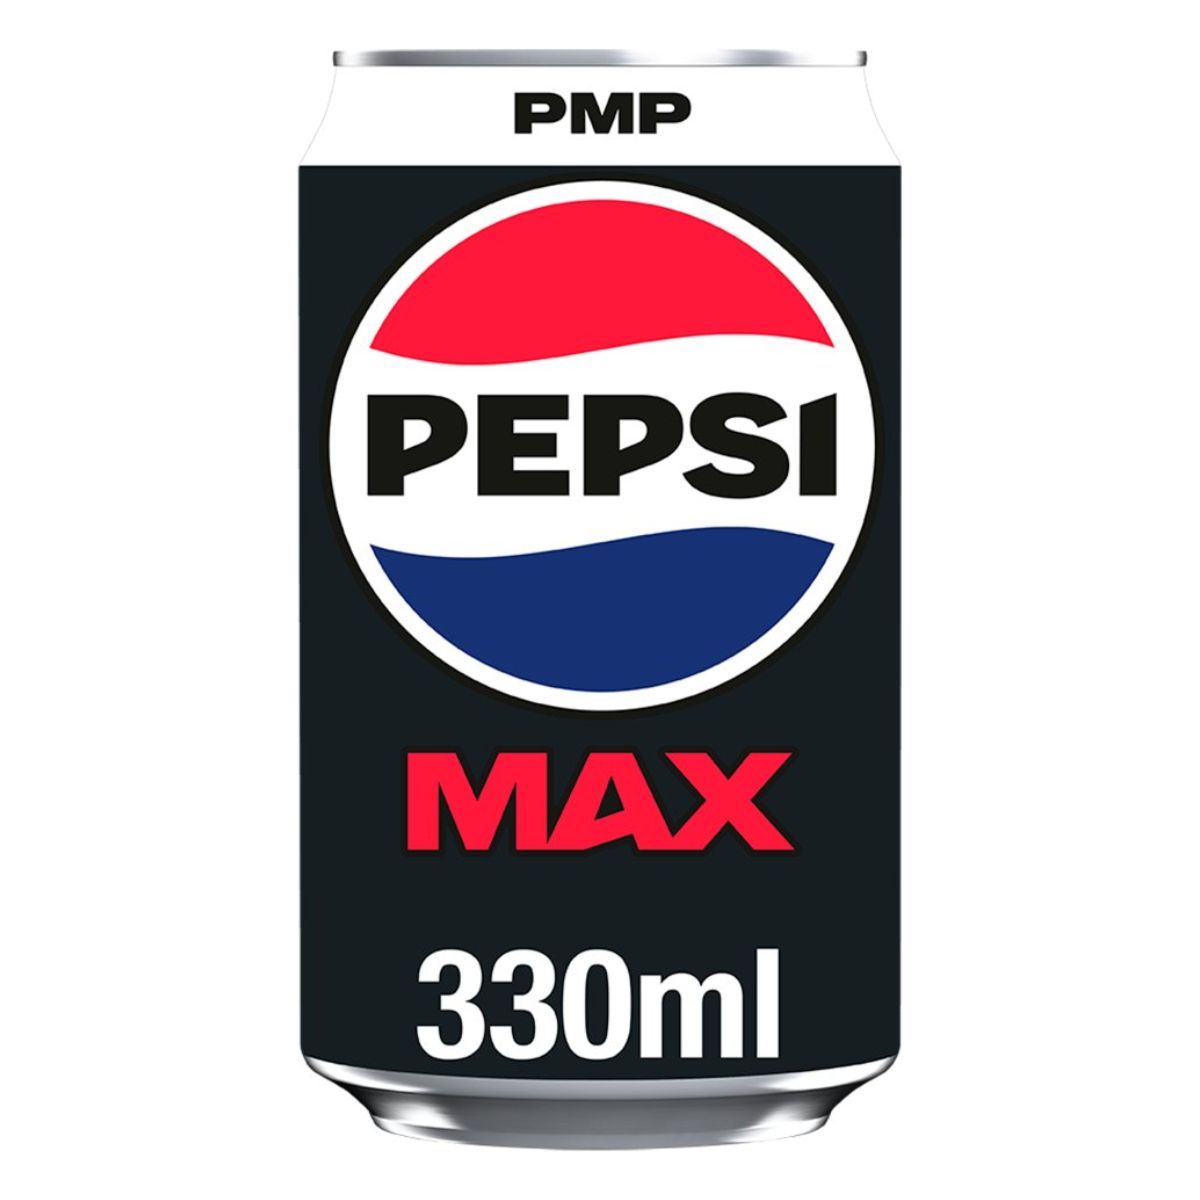 A Pepsi - Max Can - 330ml on a white background.